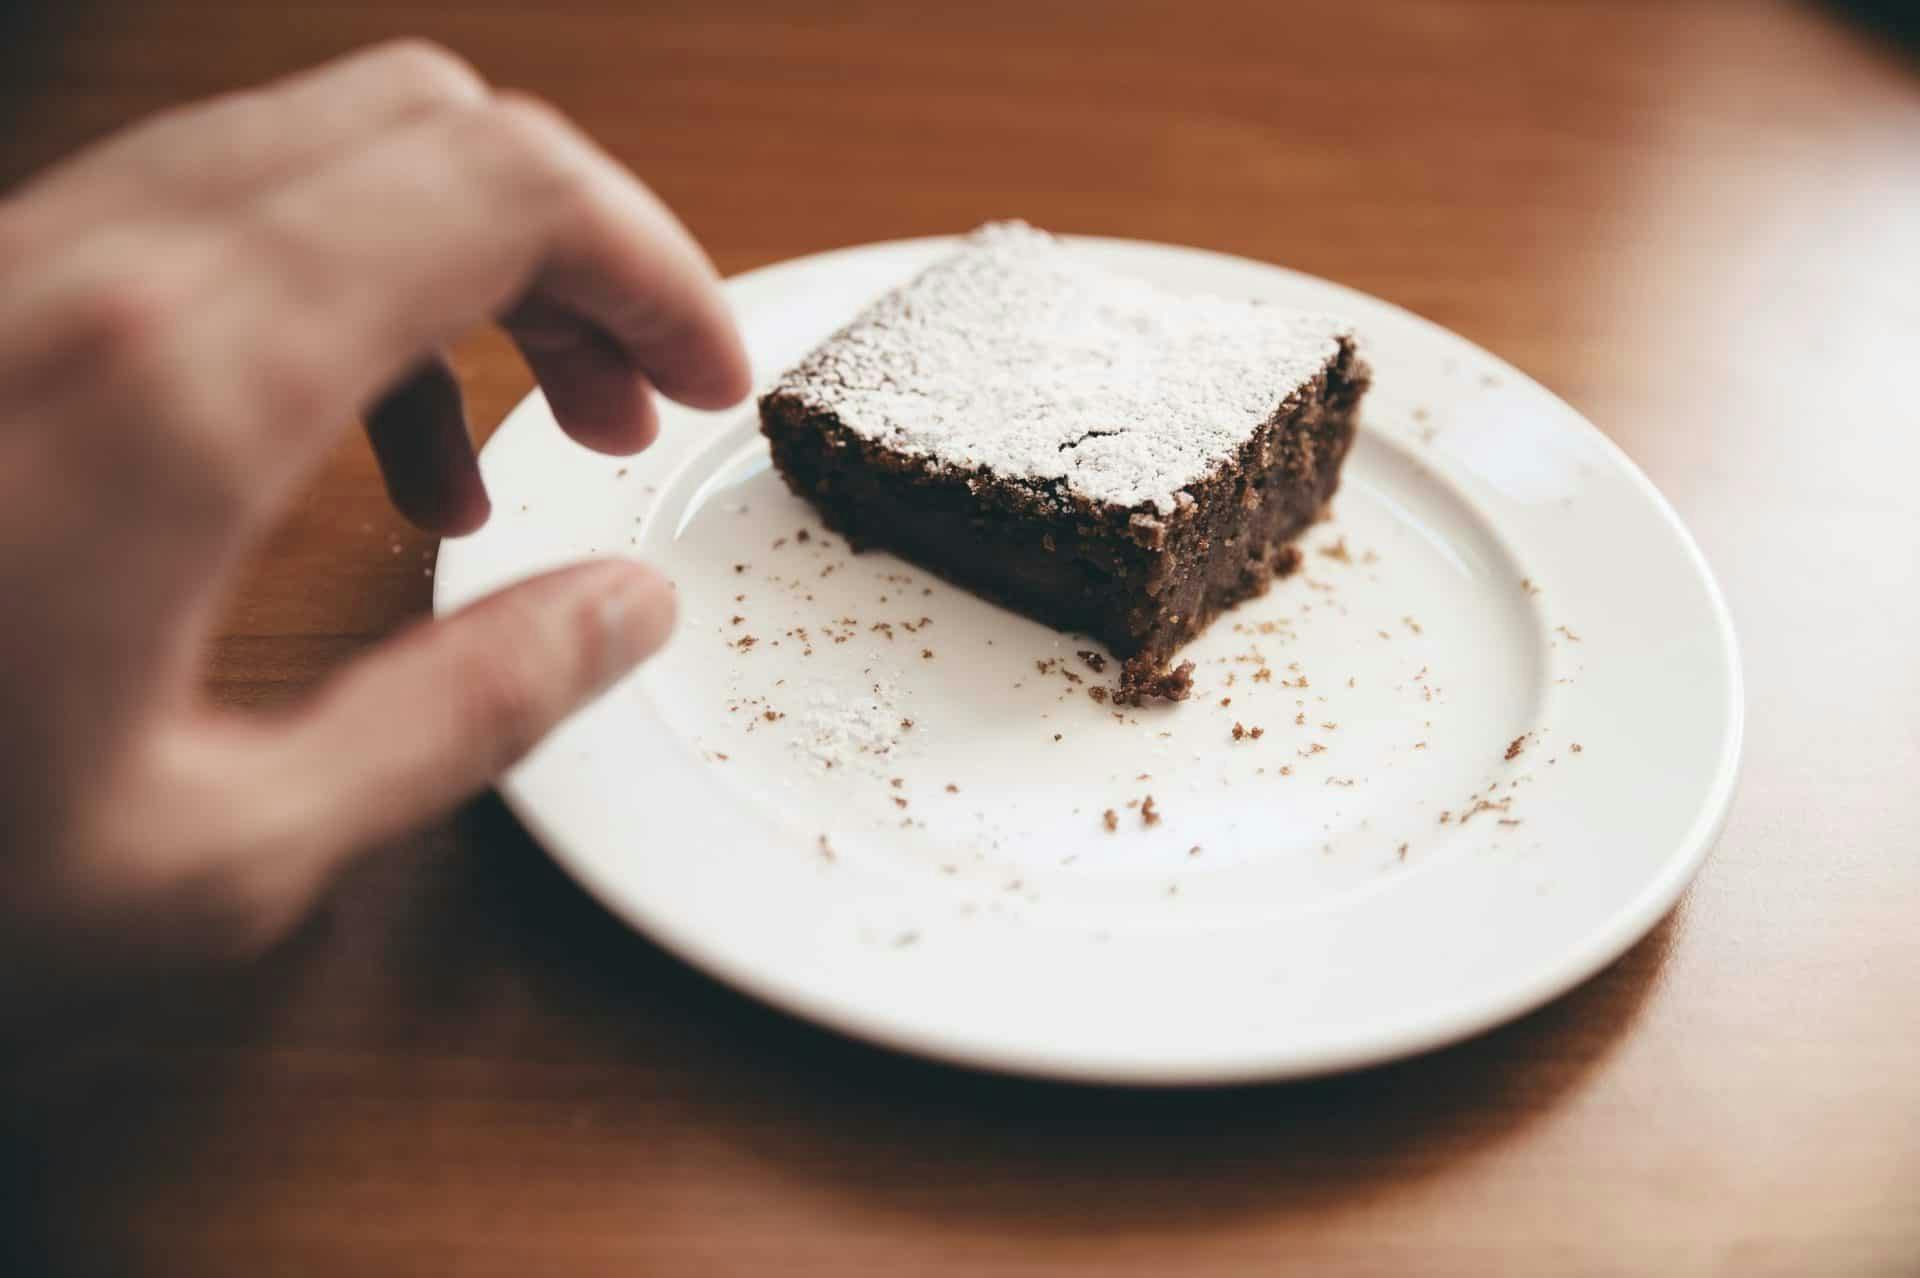 A brownie dusted with powdered sugar sits on a plate, while a hand reaches toward it with delight? Or is it trepidation? By Glenn Carstens via Unsplash